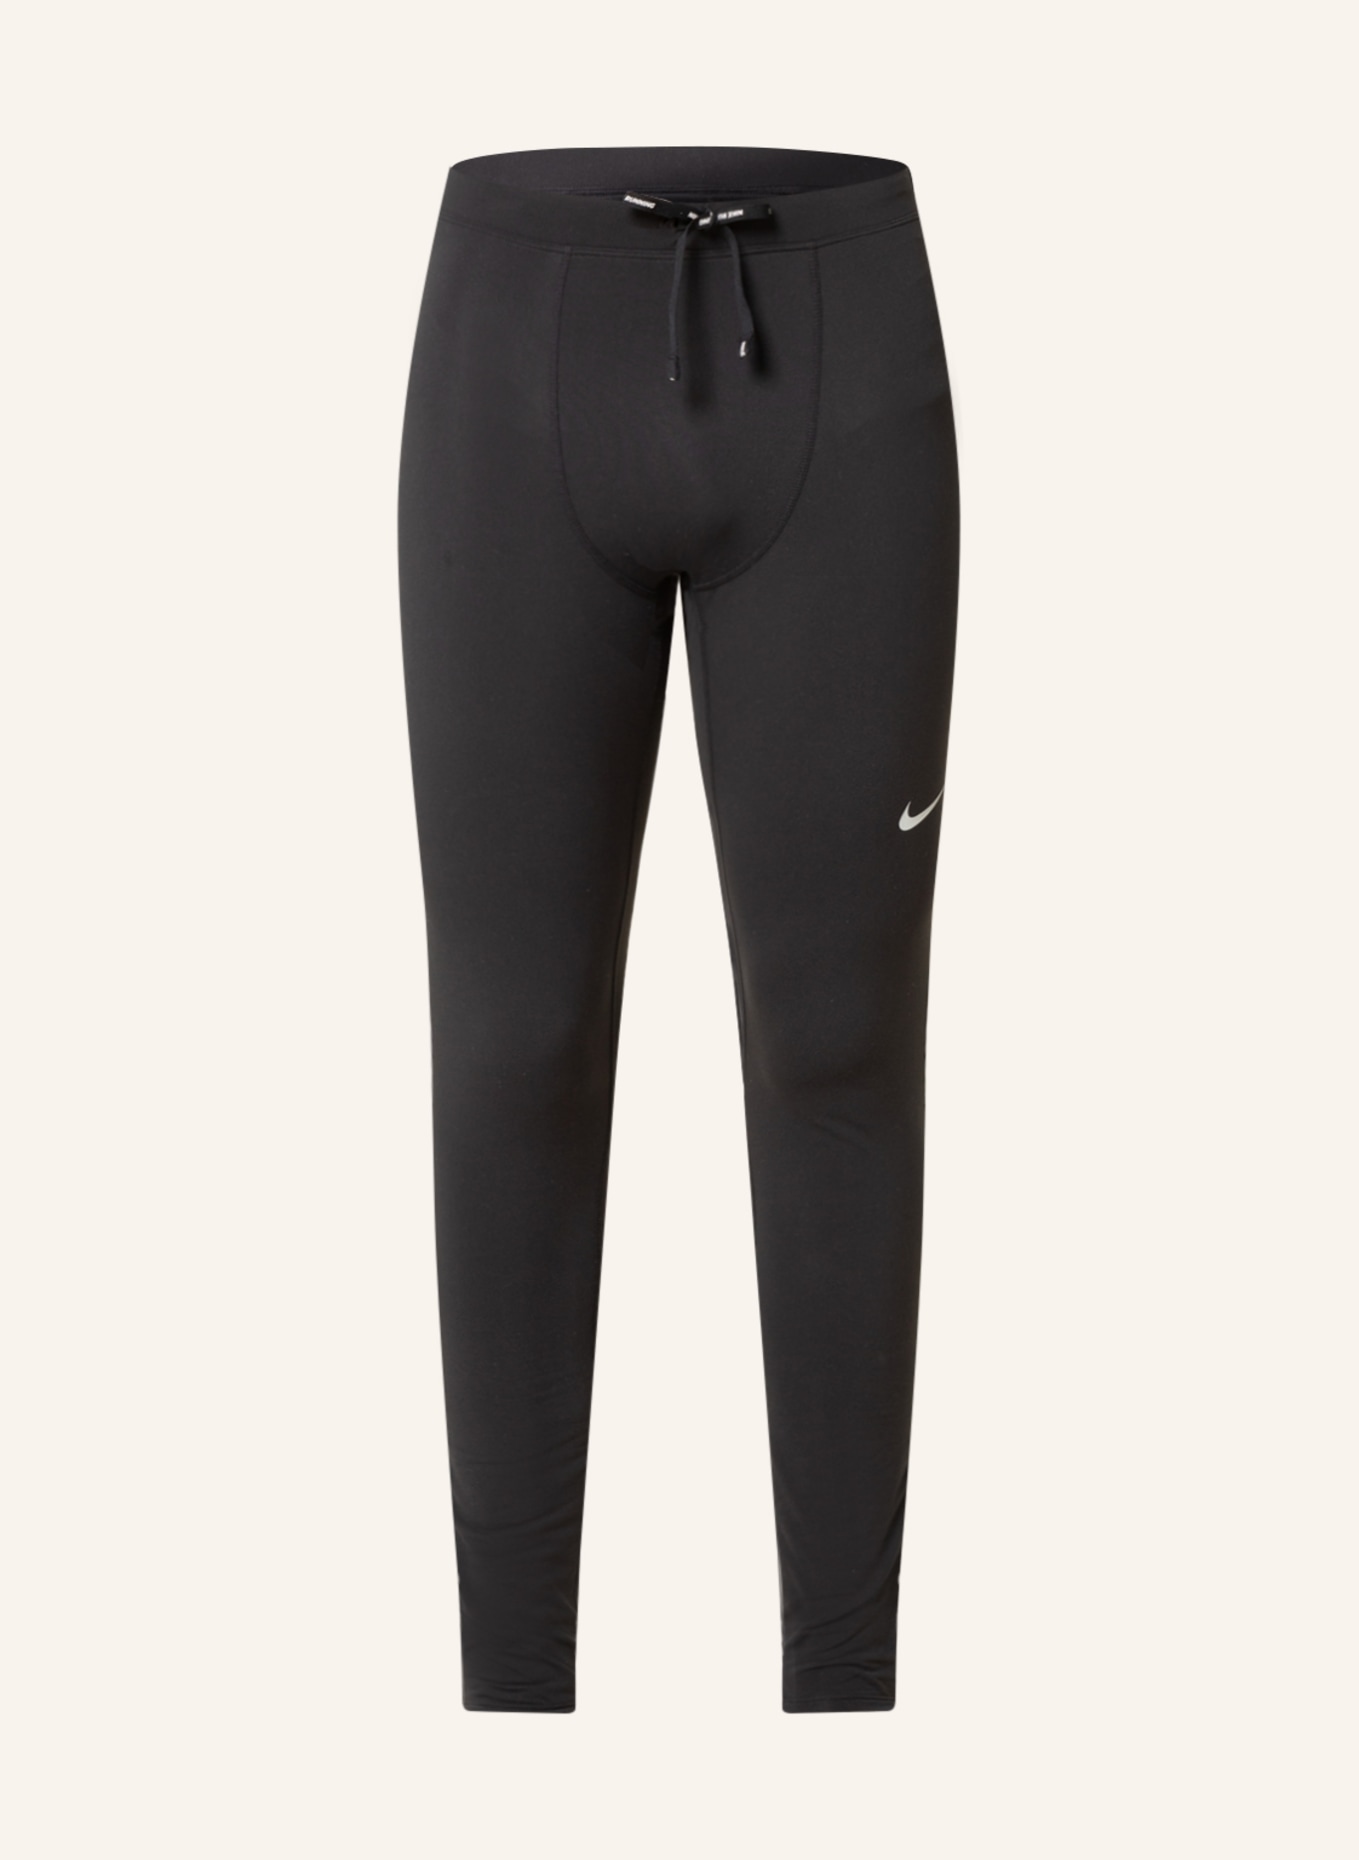 Nike Running tights REPELL CHALLENGER in black